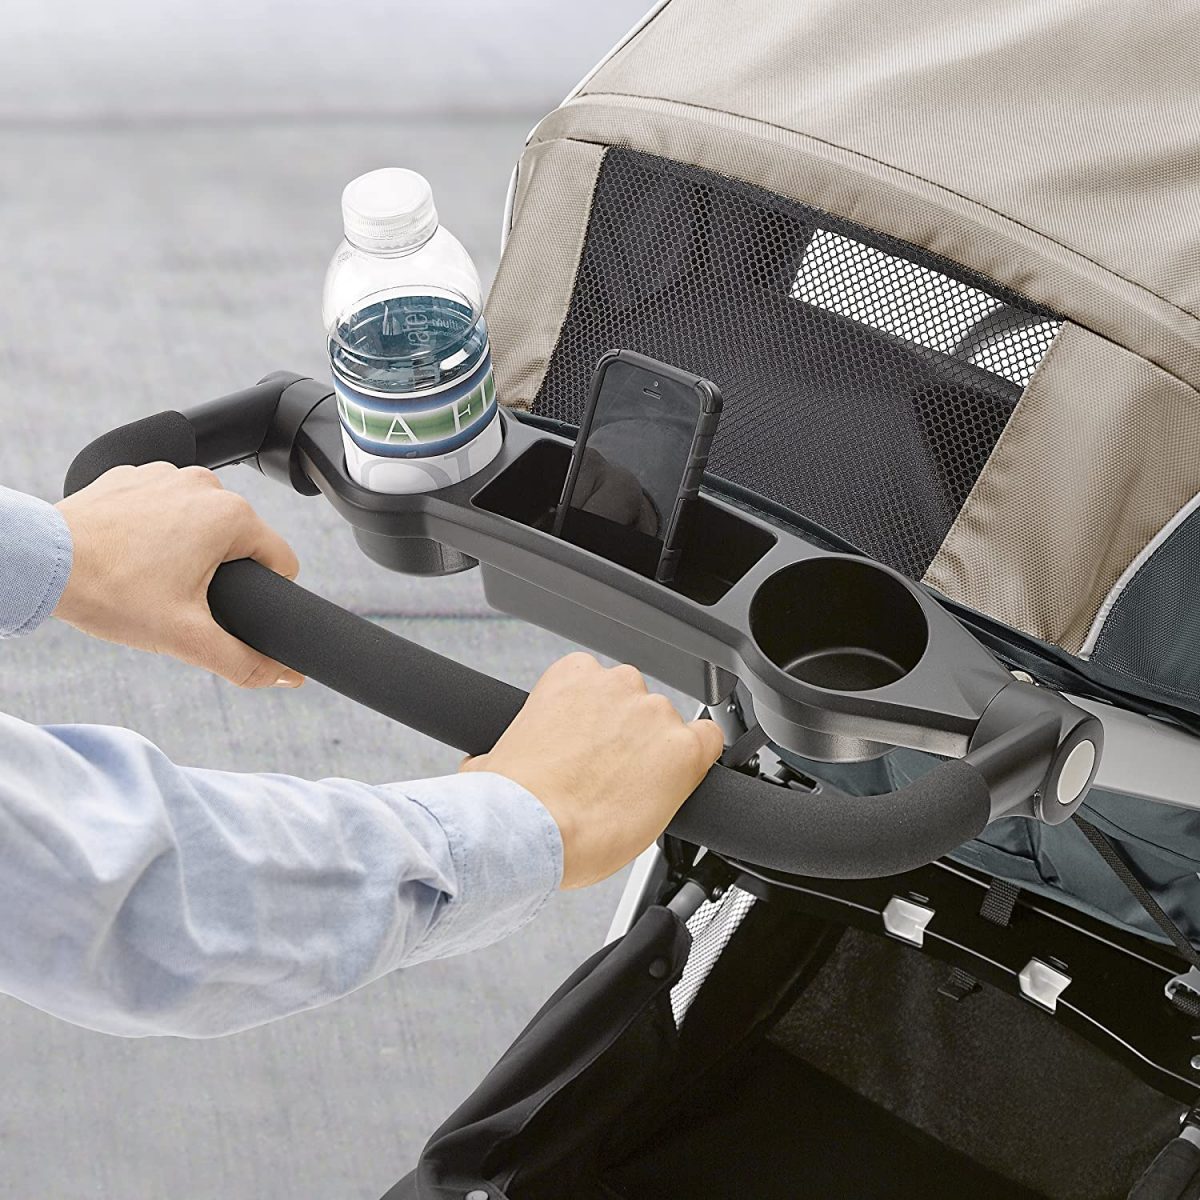 A stroller with cup holder on the handle